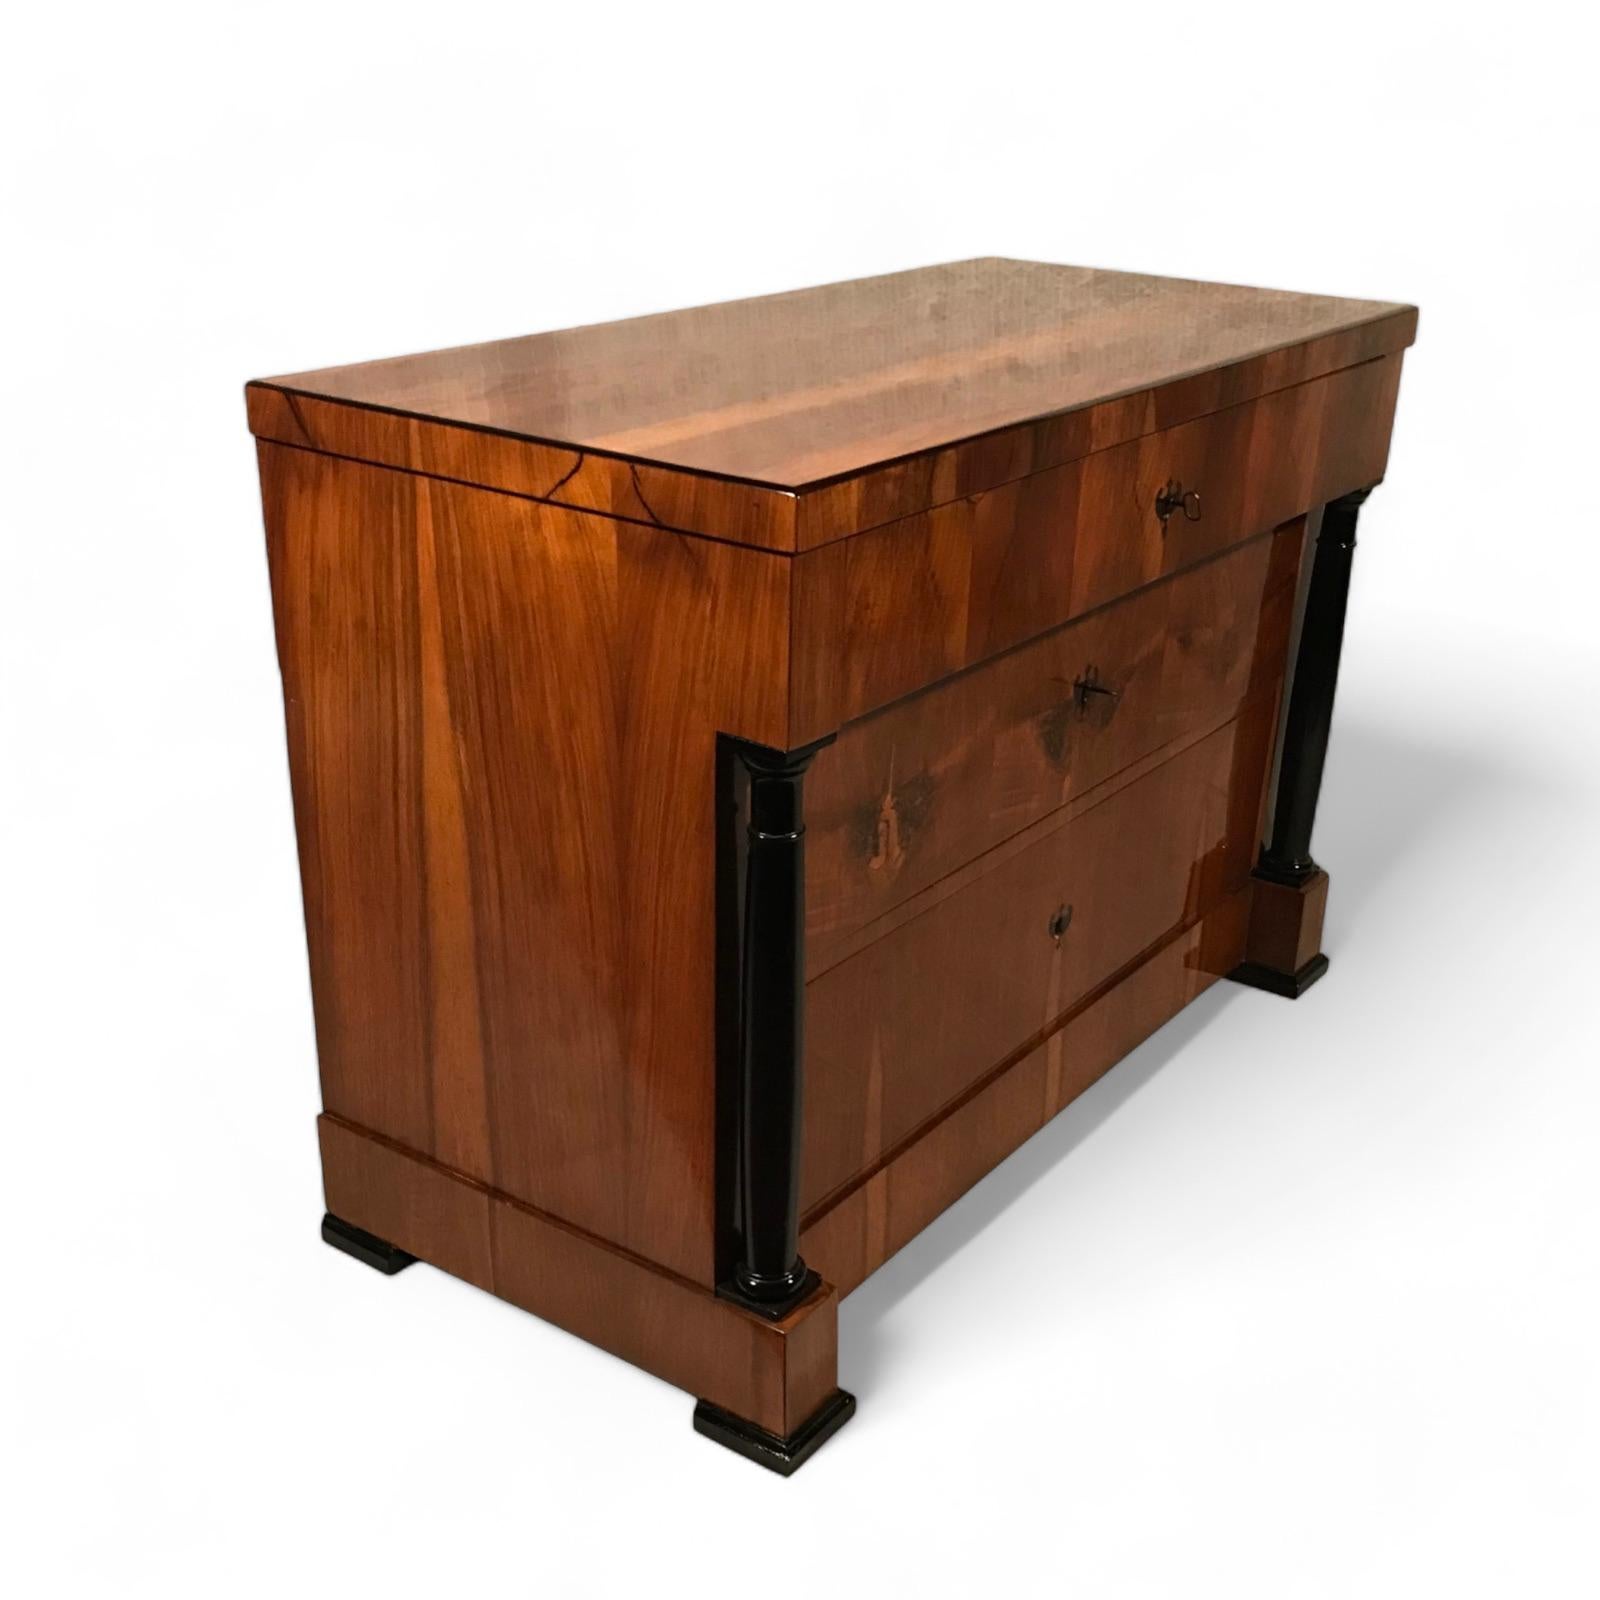 Step into history with our classic Biedermeier chest of drawers, originating from 1820 in South Germany. Crafted with exquisite walnut veneer and featuring striking ebonized columns, this piece exudes timeless elegance. With three drawers, including